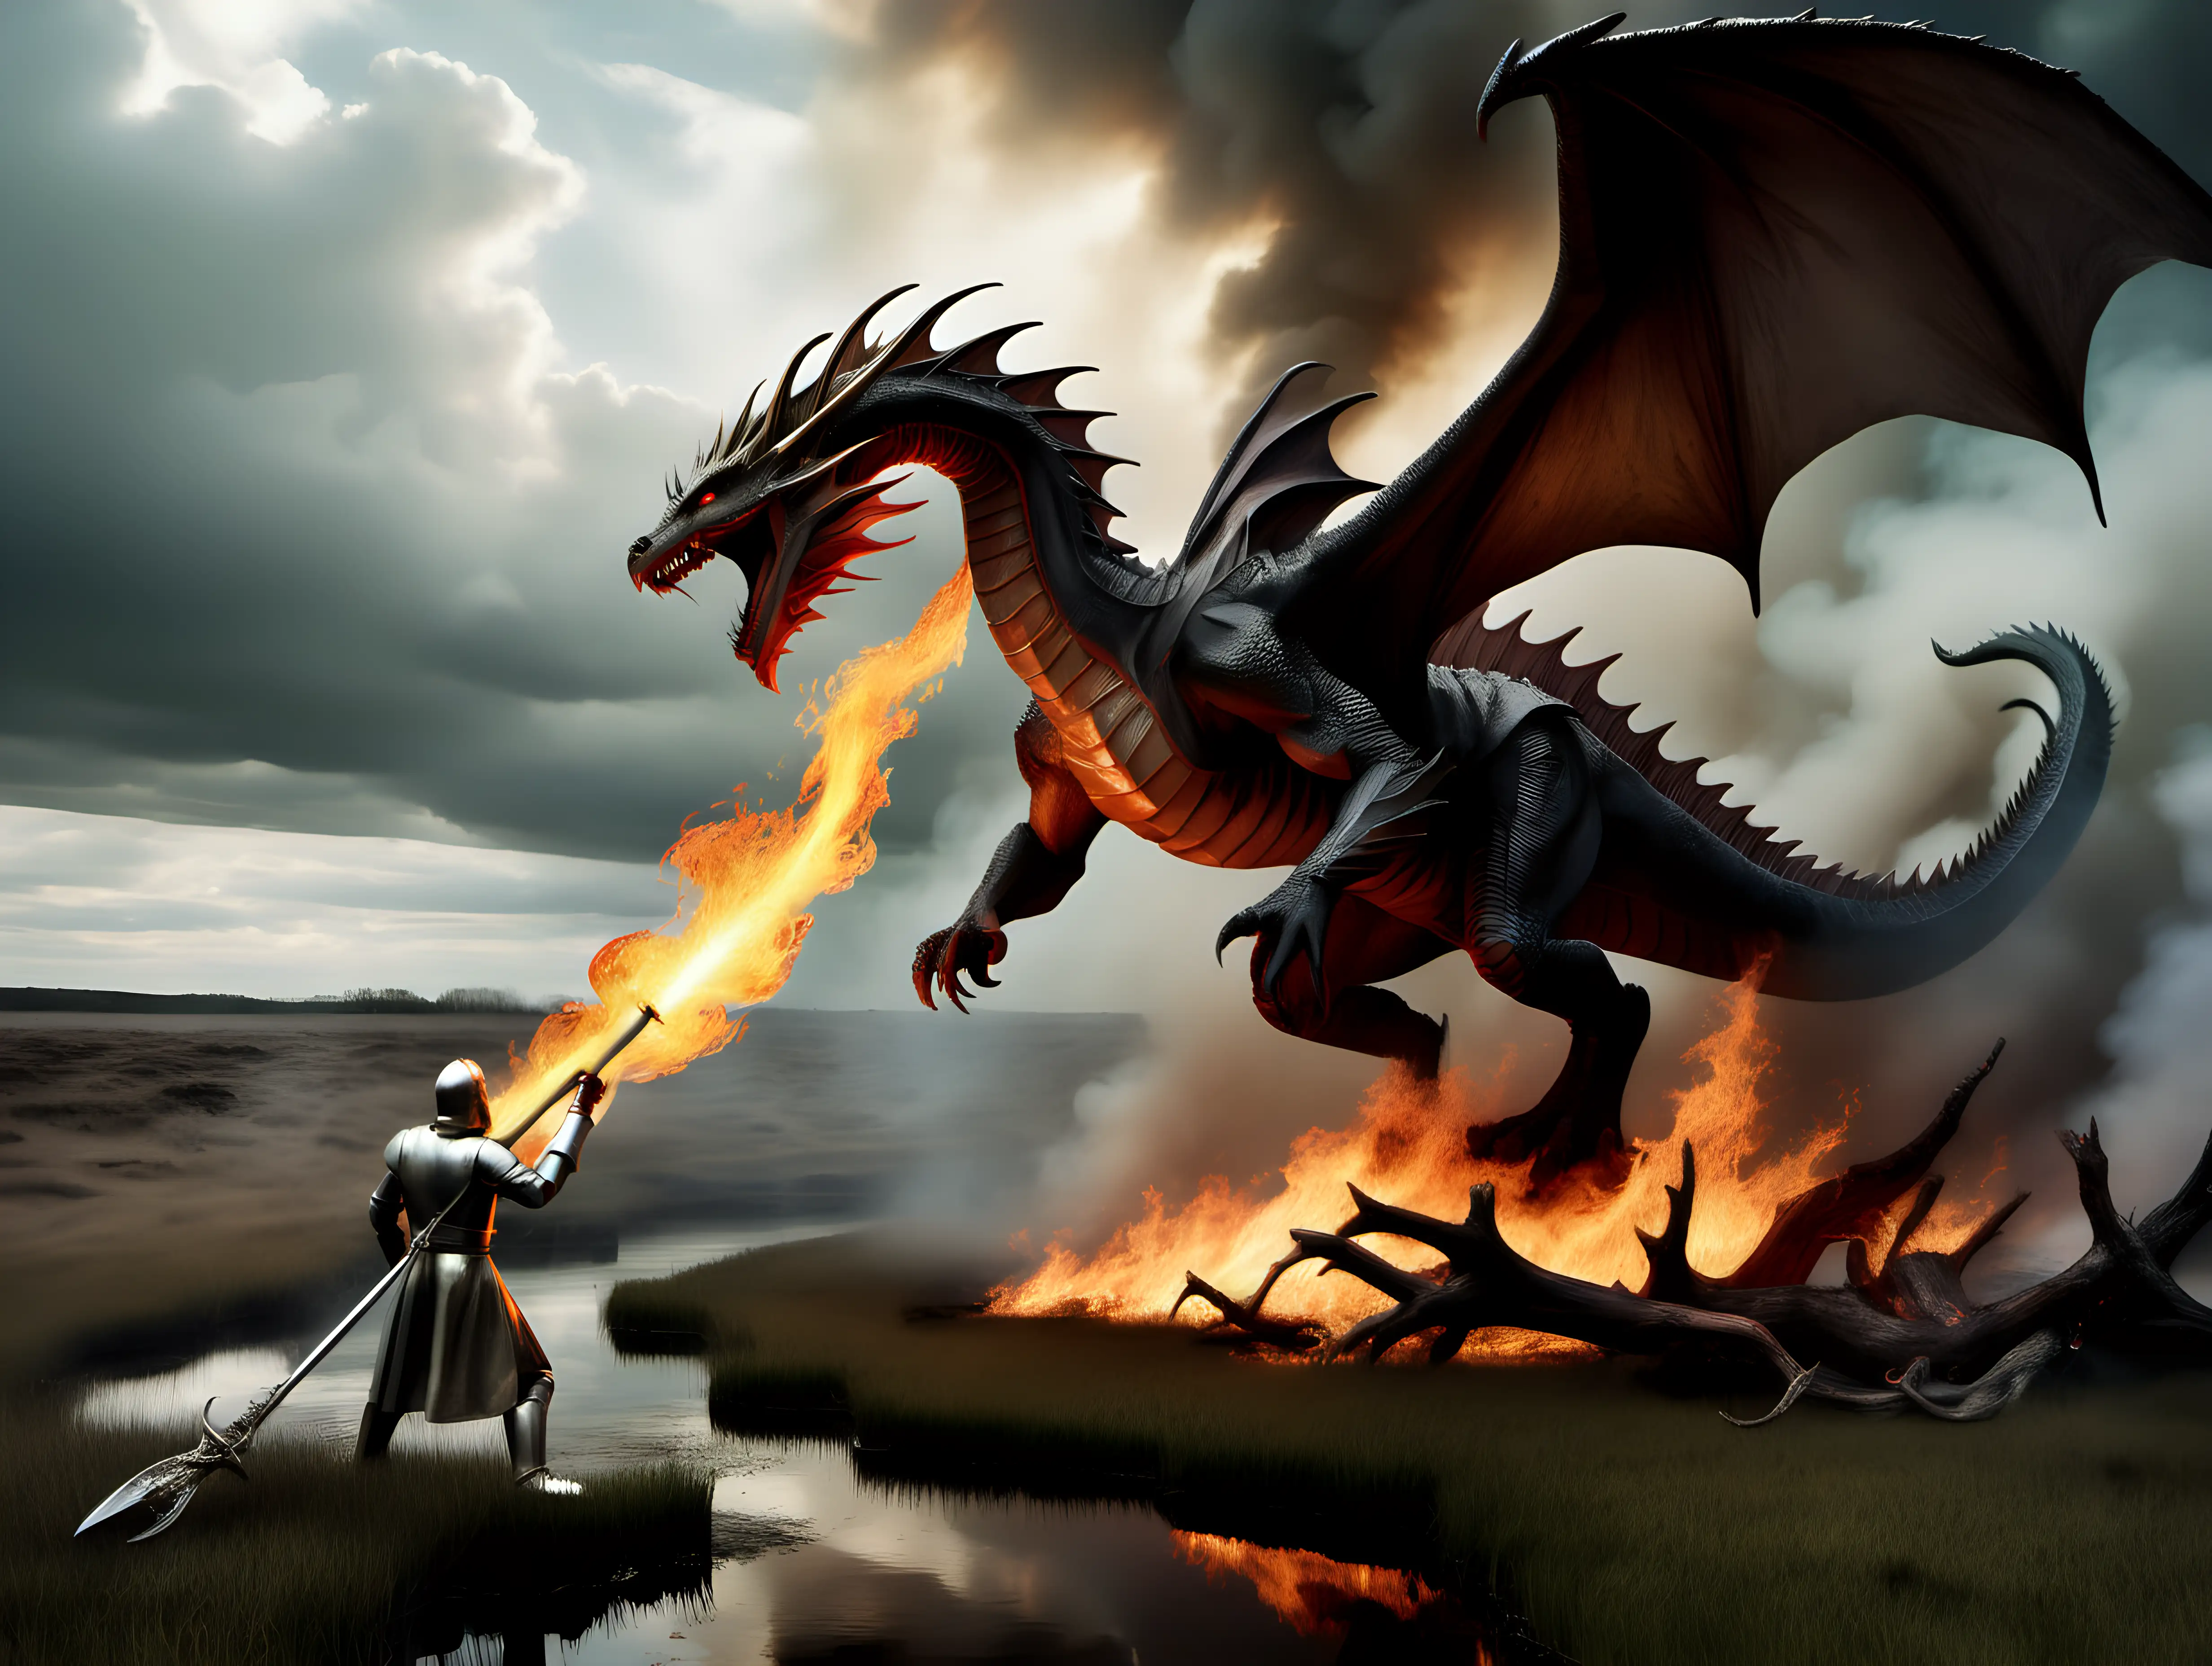 King Arthur Confronts and Defeats a Ferocious FireBreathing Dragon in Mysterious Bog